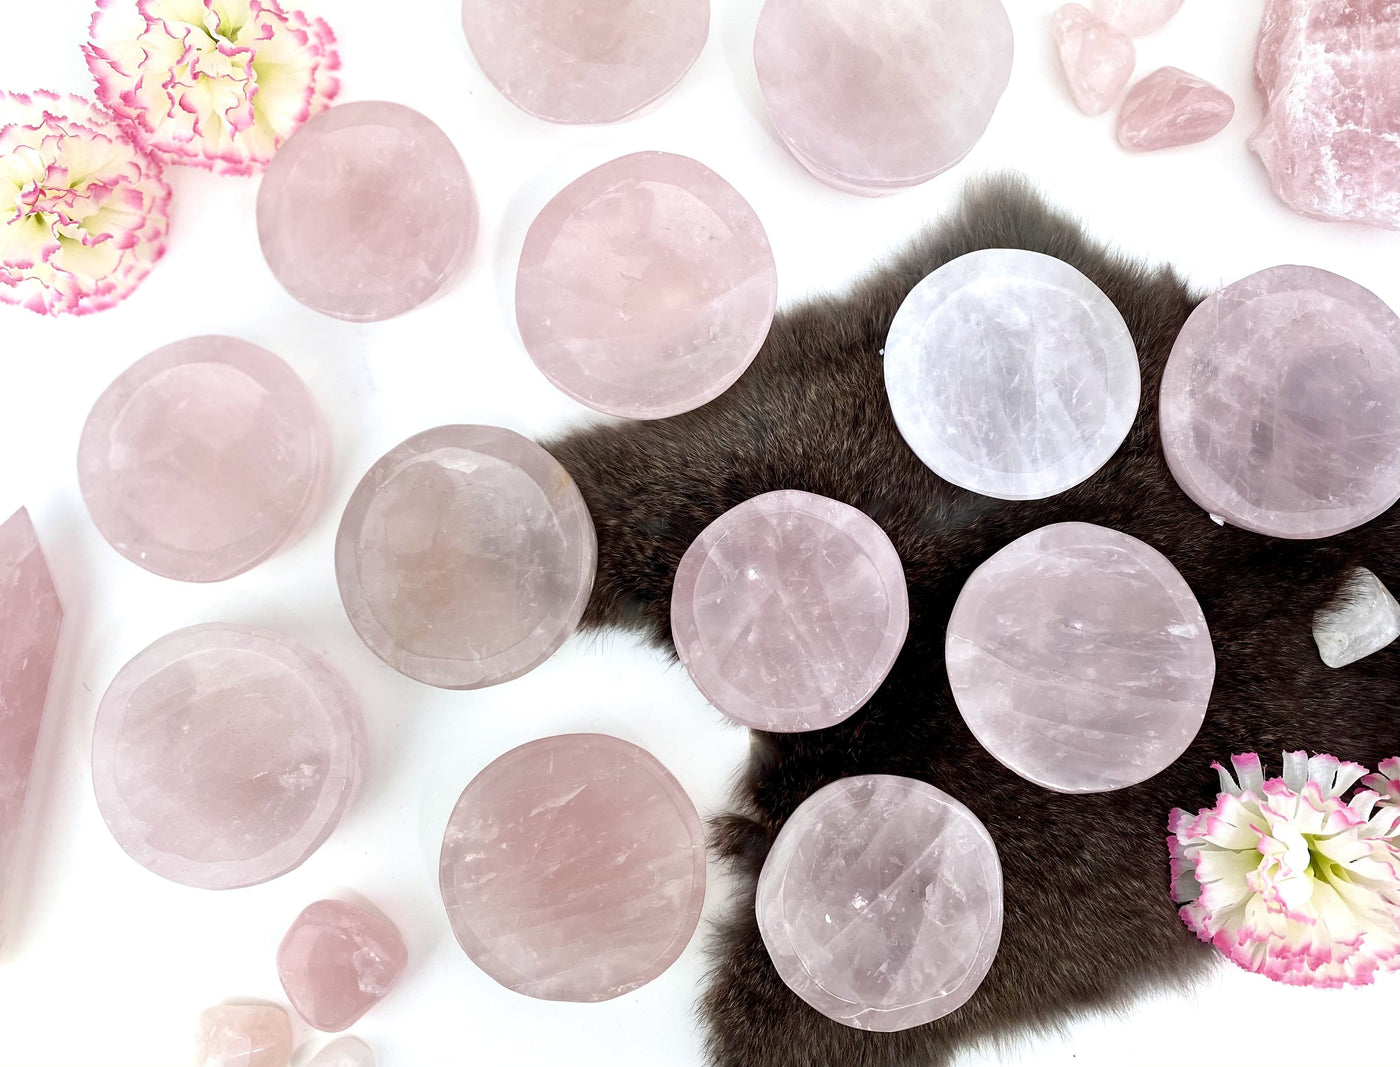 Rose Quartz Stone Round Dishes with fur and flowers as decoration